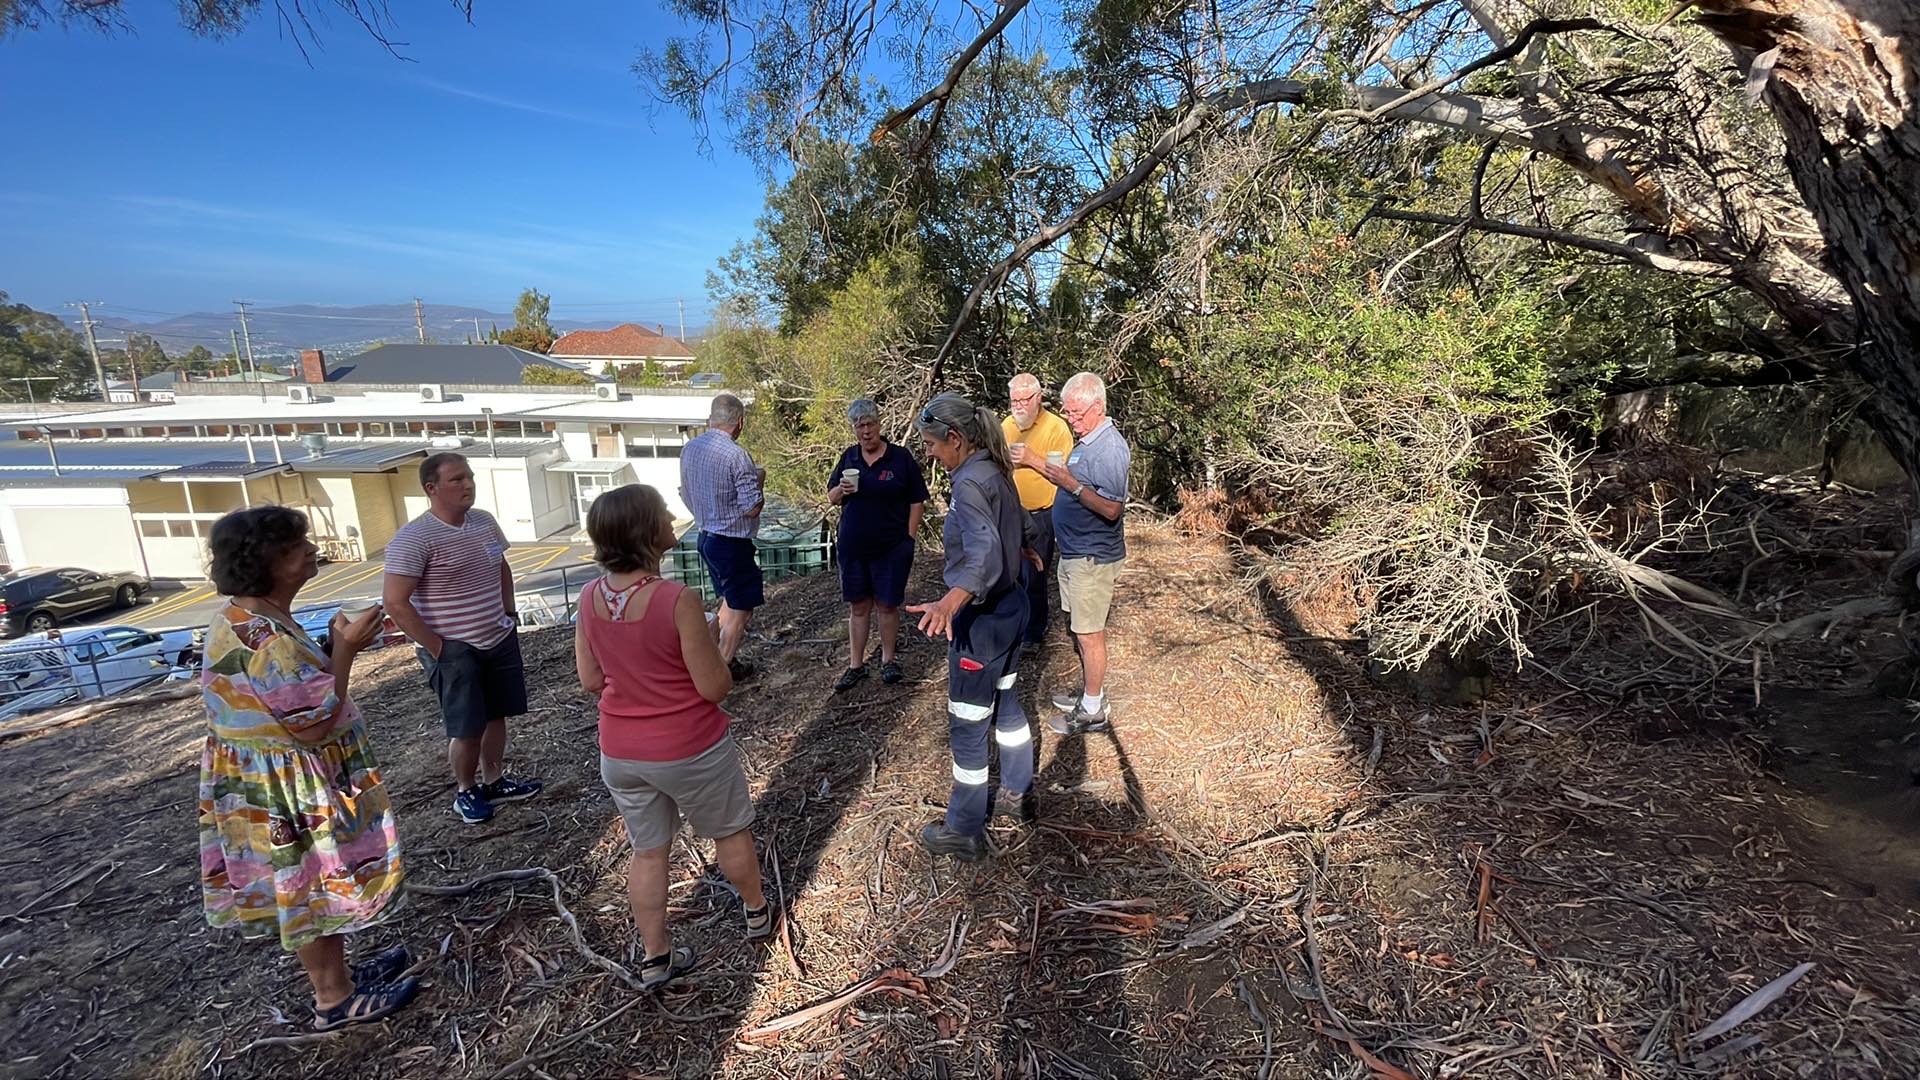 Interested community members and City of Hobart staff standing in the Haldane Reserve during a tea break, discussing their interests.